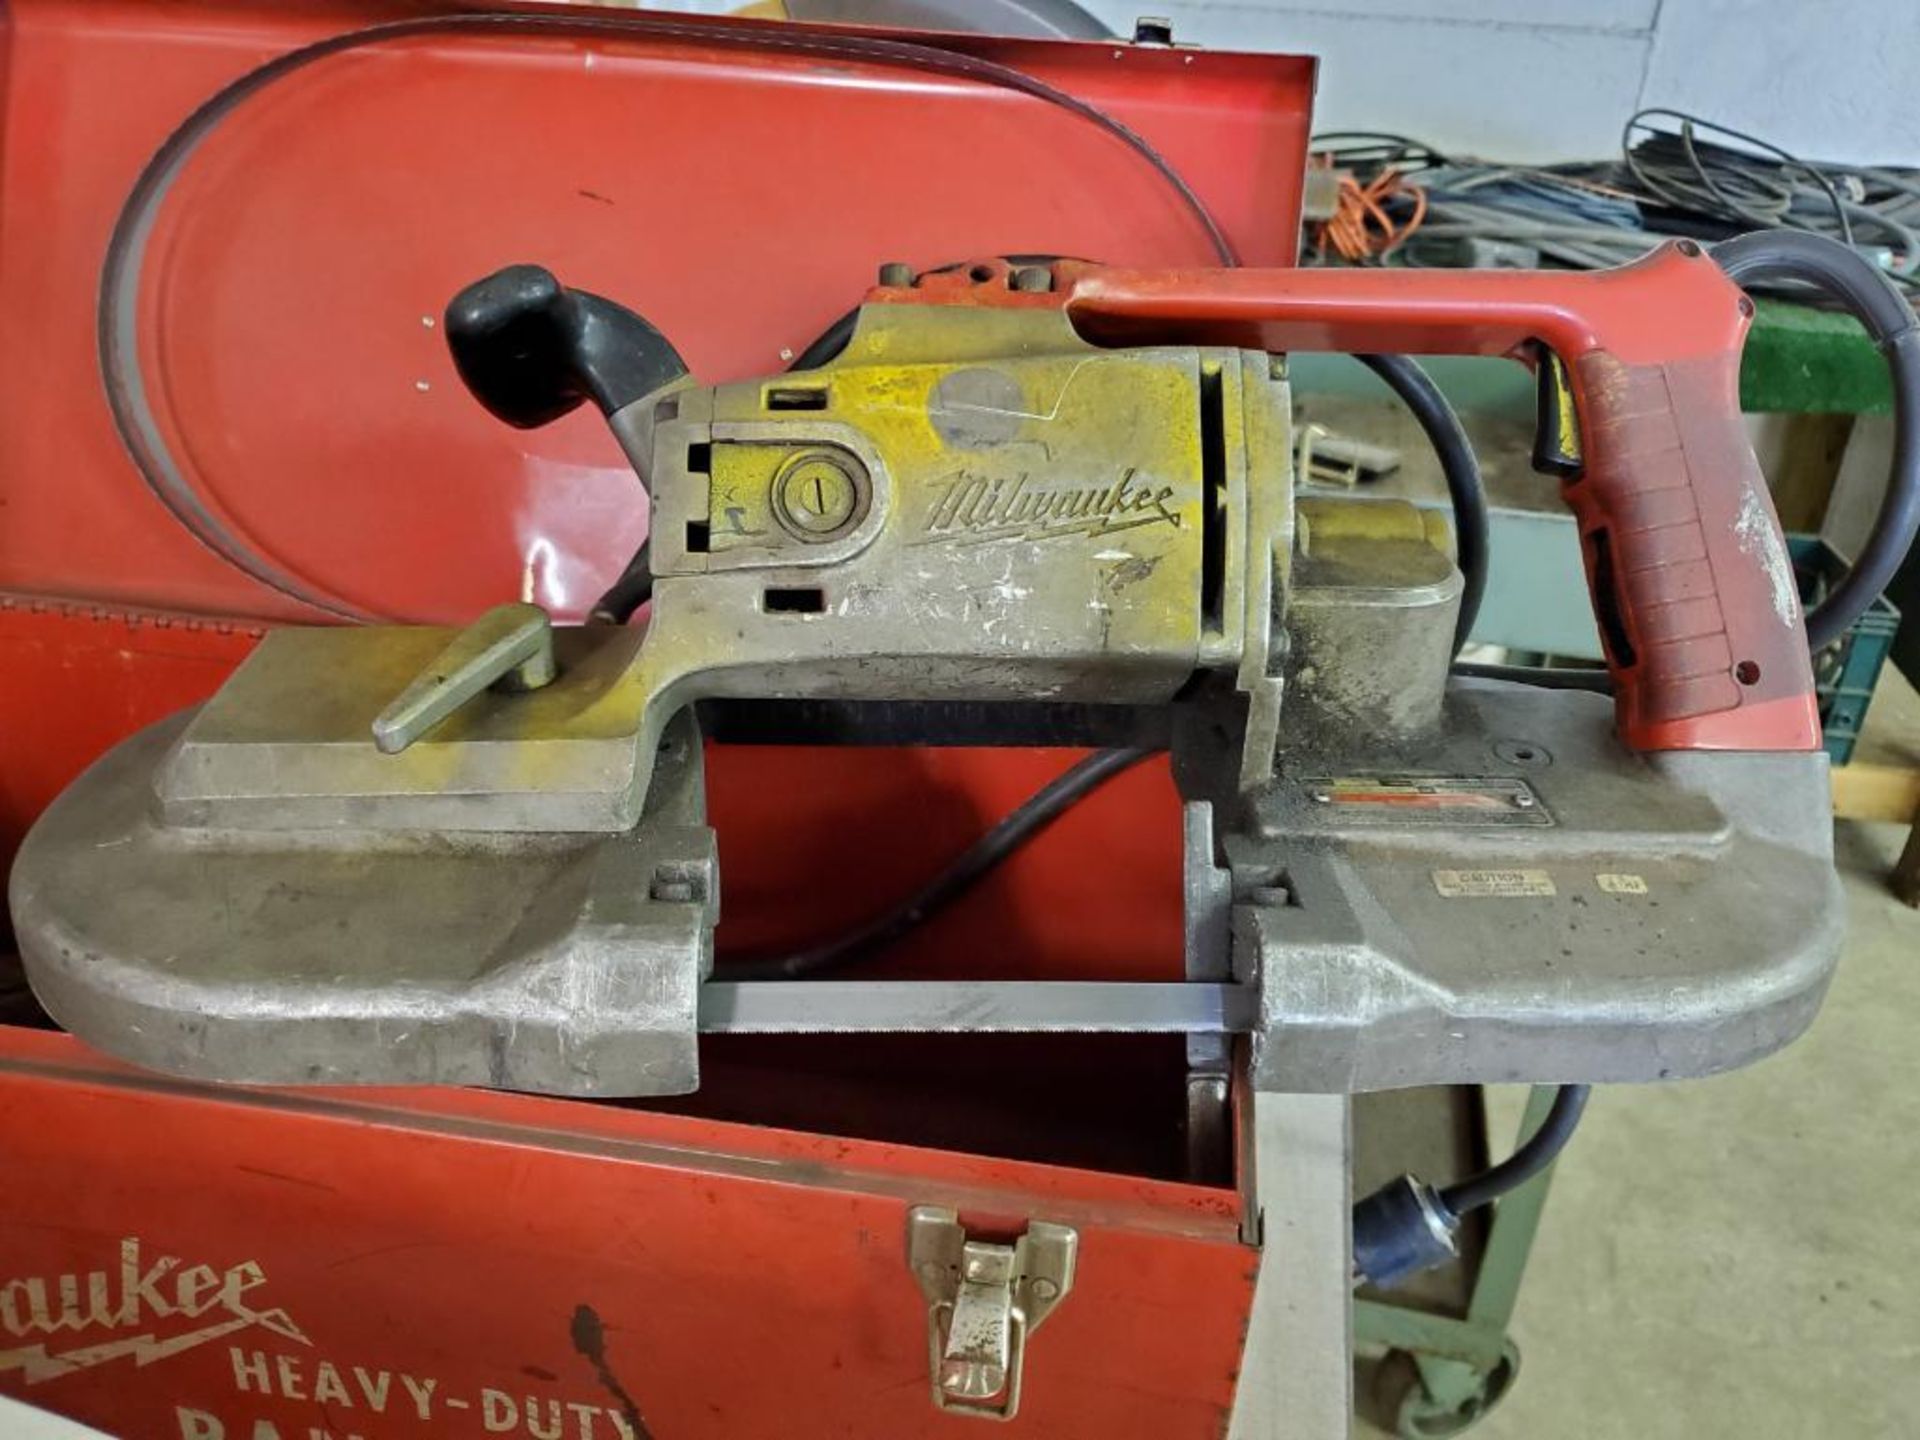 MILWAUKEE HEAVY DUTY PORTABLE BAND SAW WITH SPARE BLADE BANDS - Image 3 of 6